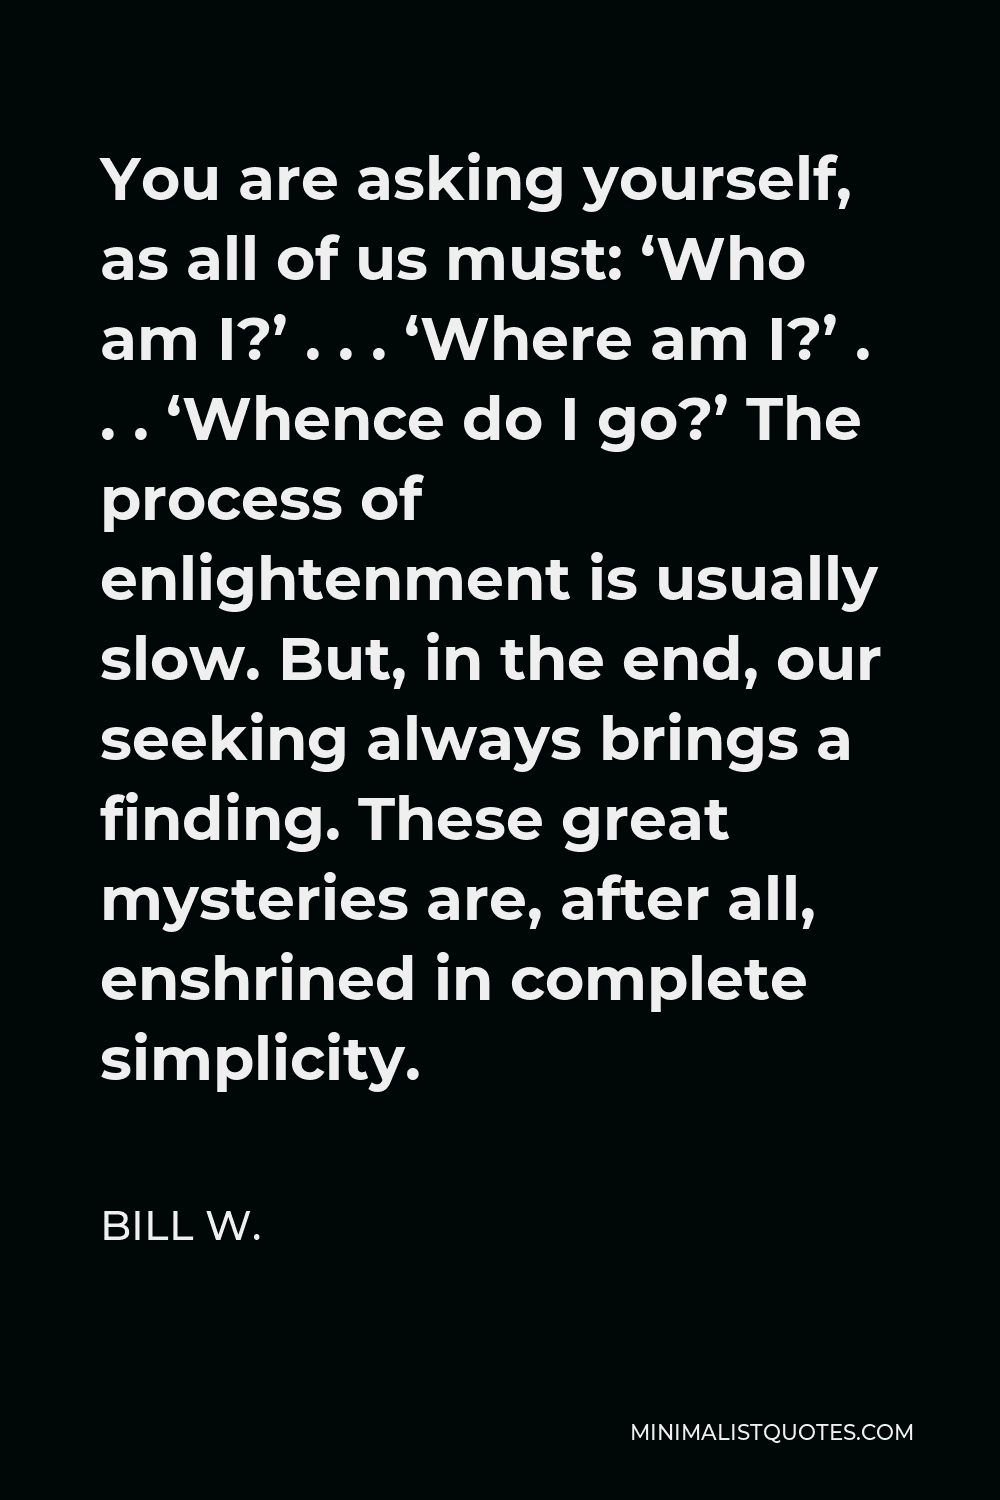 Bill W. Quote - You are asking yourself, as all of us must: ‘Who am I?’ . . . ‘Where am I?’ . . . ‘Whence do I go?’ The process of enlightenment is usually slow. But, in the end, our seeking always brings a finding. These great mysteries are, after all, enshrined in complete simplicity.